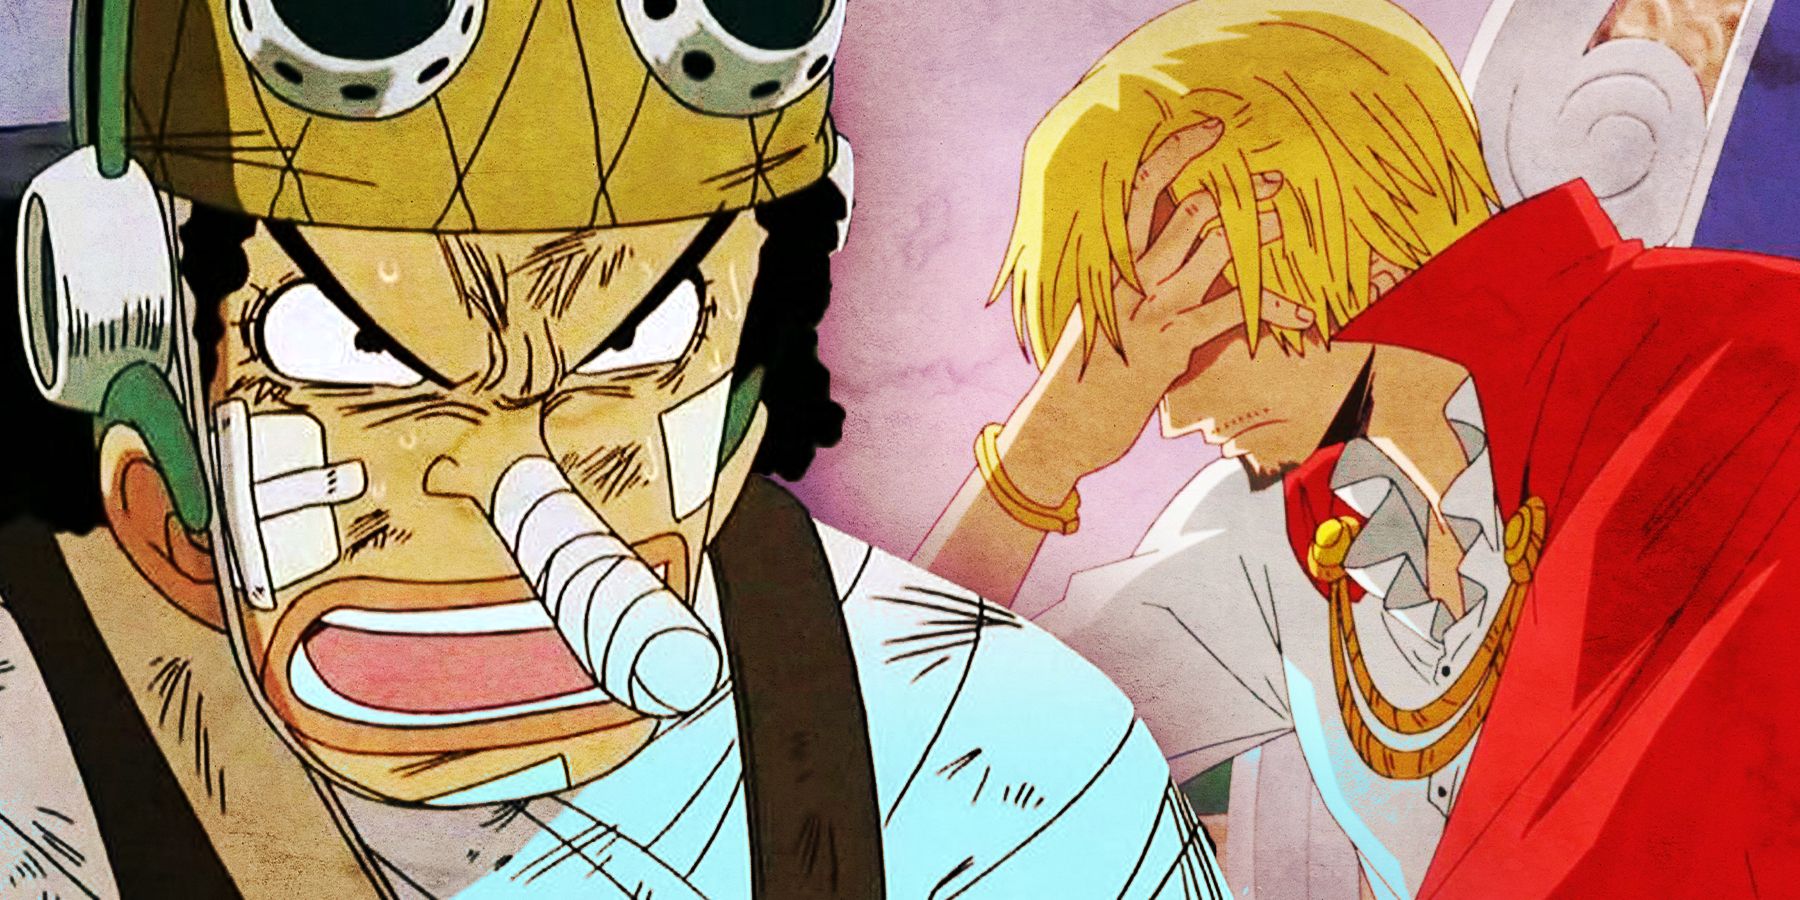 Split image of One Piece's Usopp angry on the left and Sanji conflicted on the right